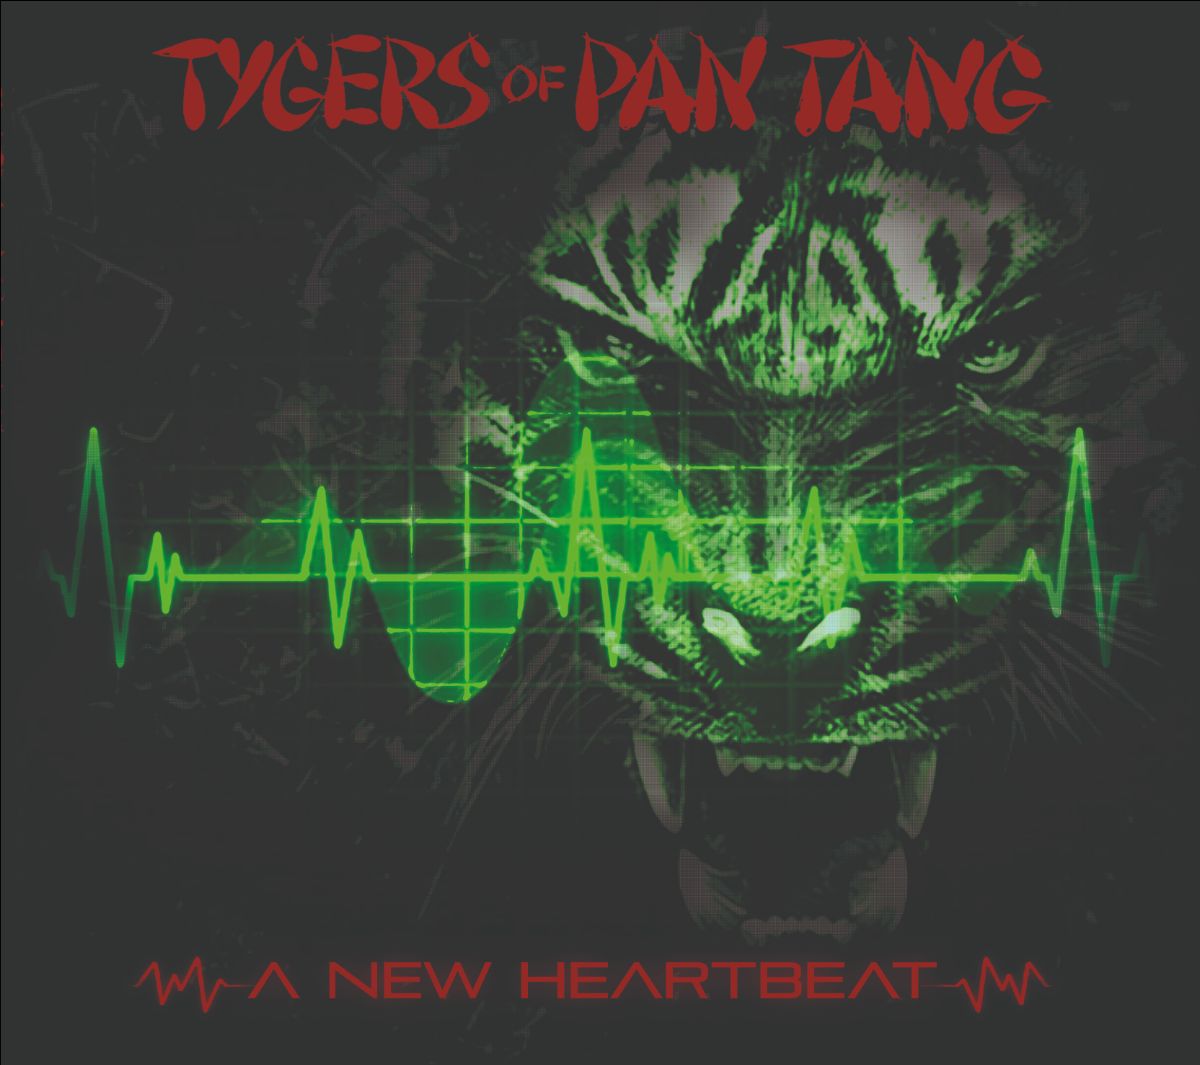 169717-tygers-of-pan-tang-new-ep-a-new-heartbeat-out-in-february-1347087.jpg